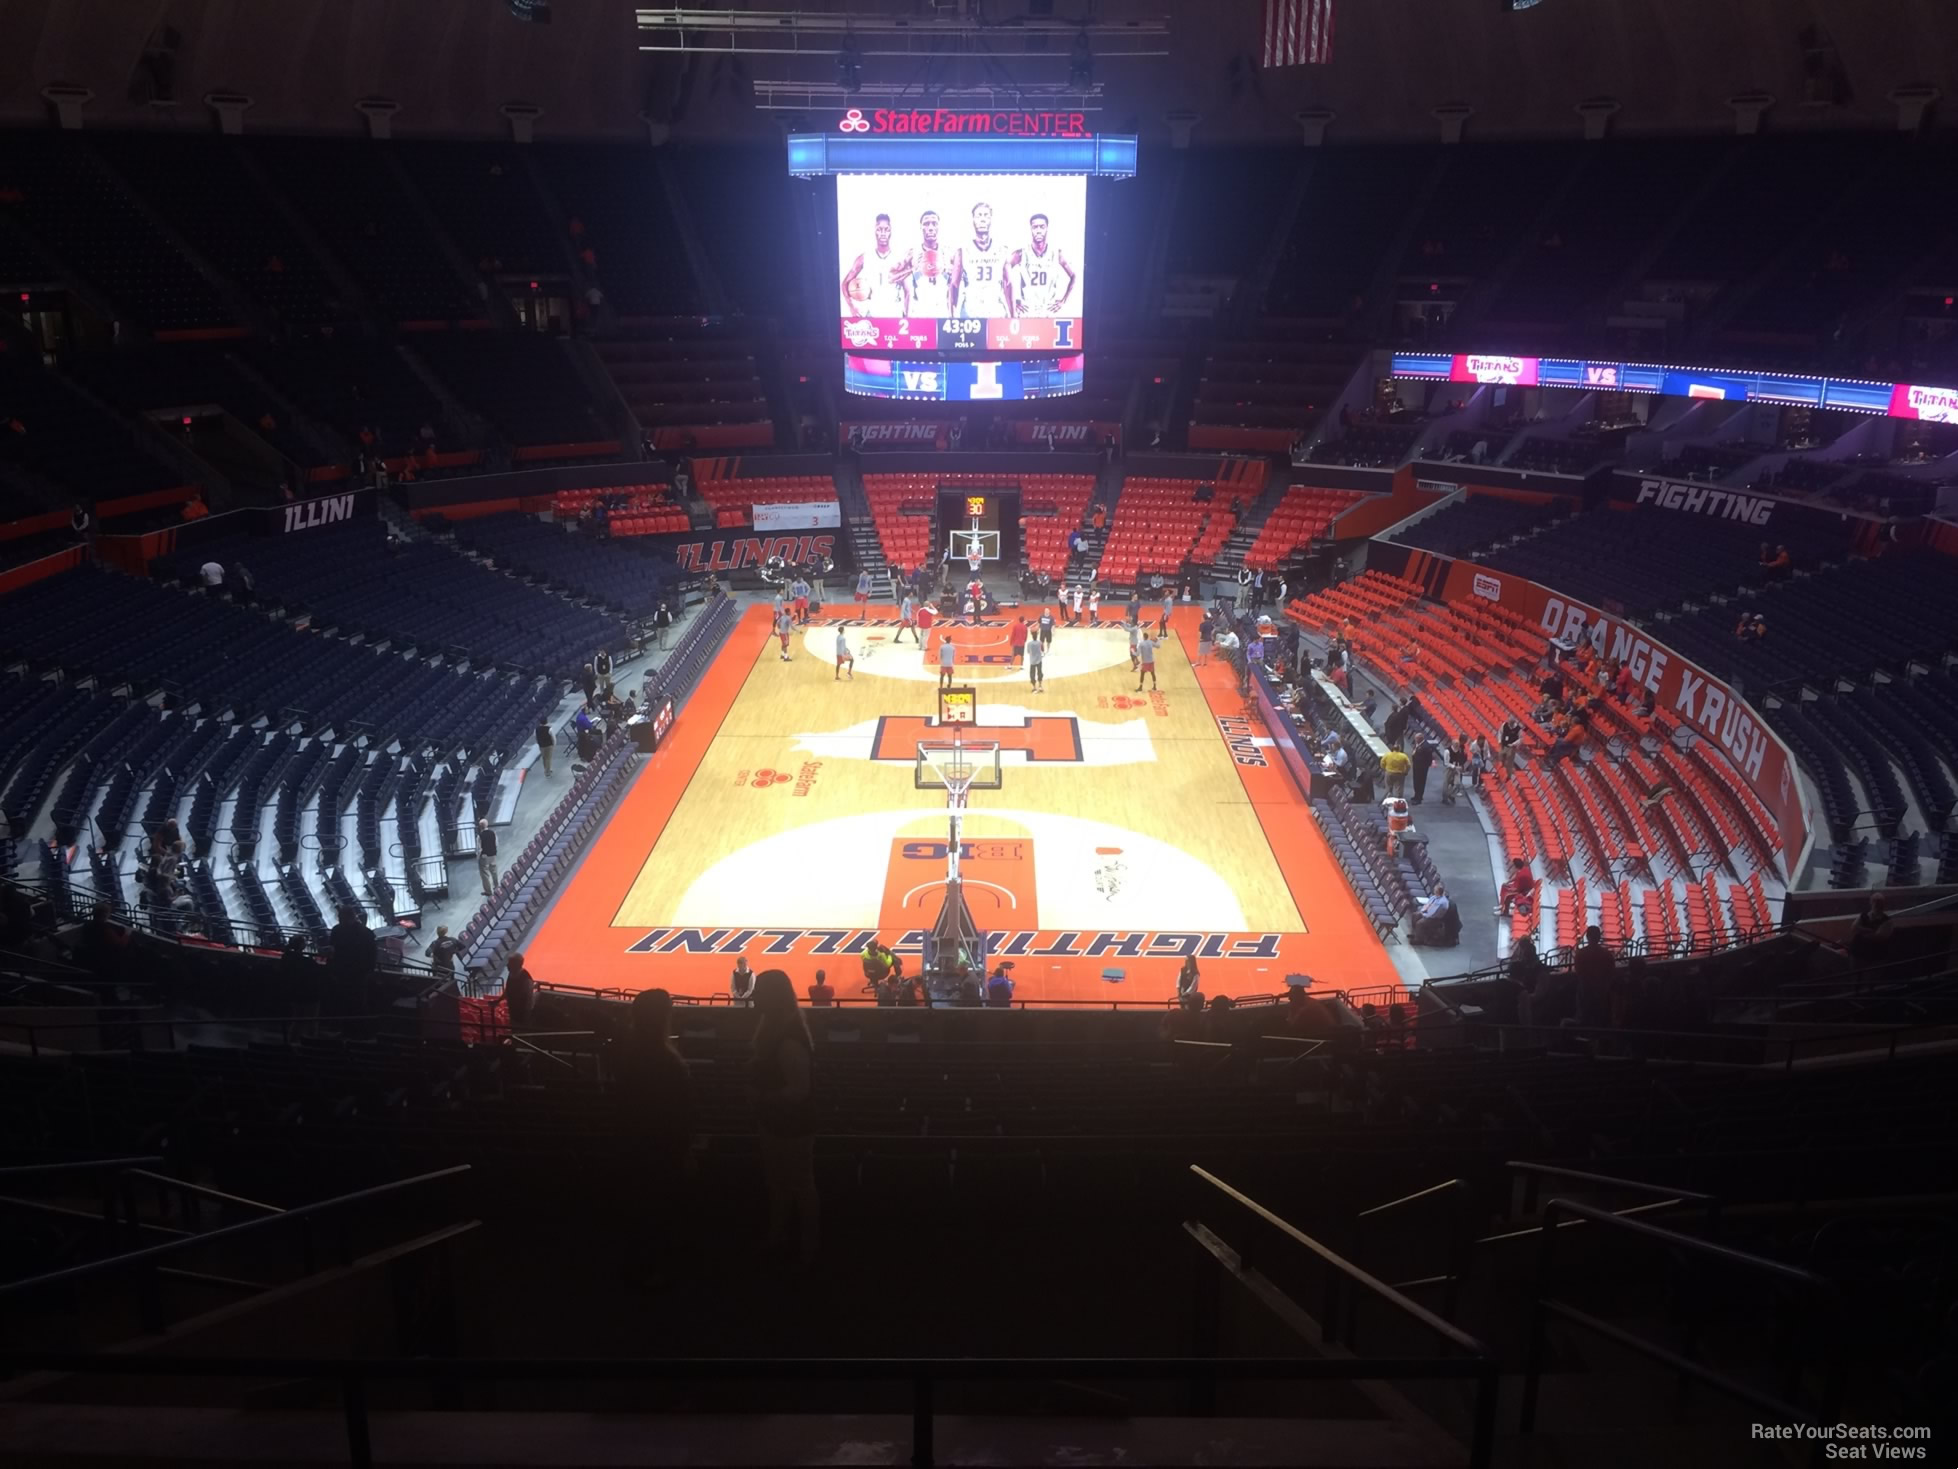 section 237, row 10 seat view  - state farm center